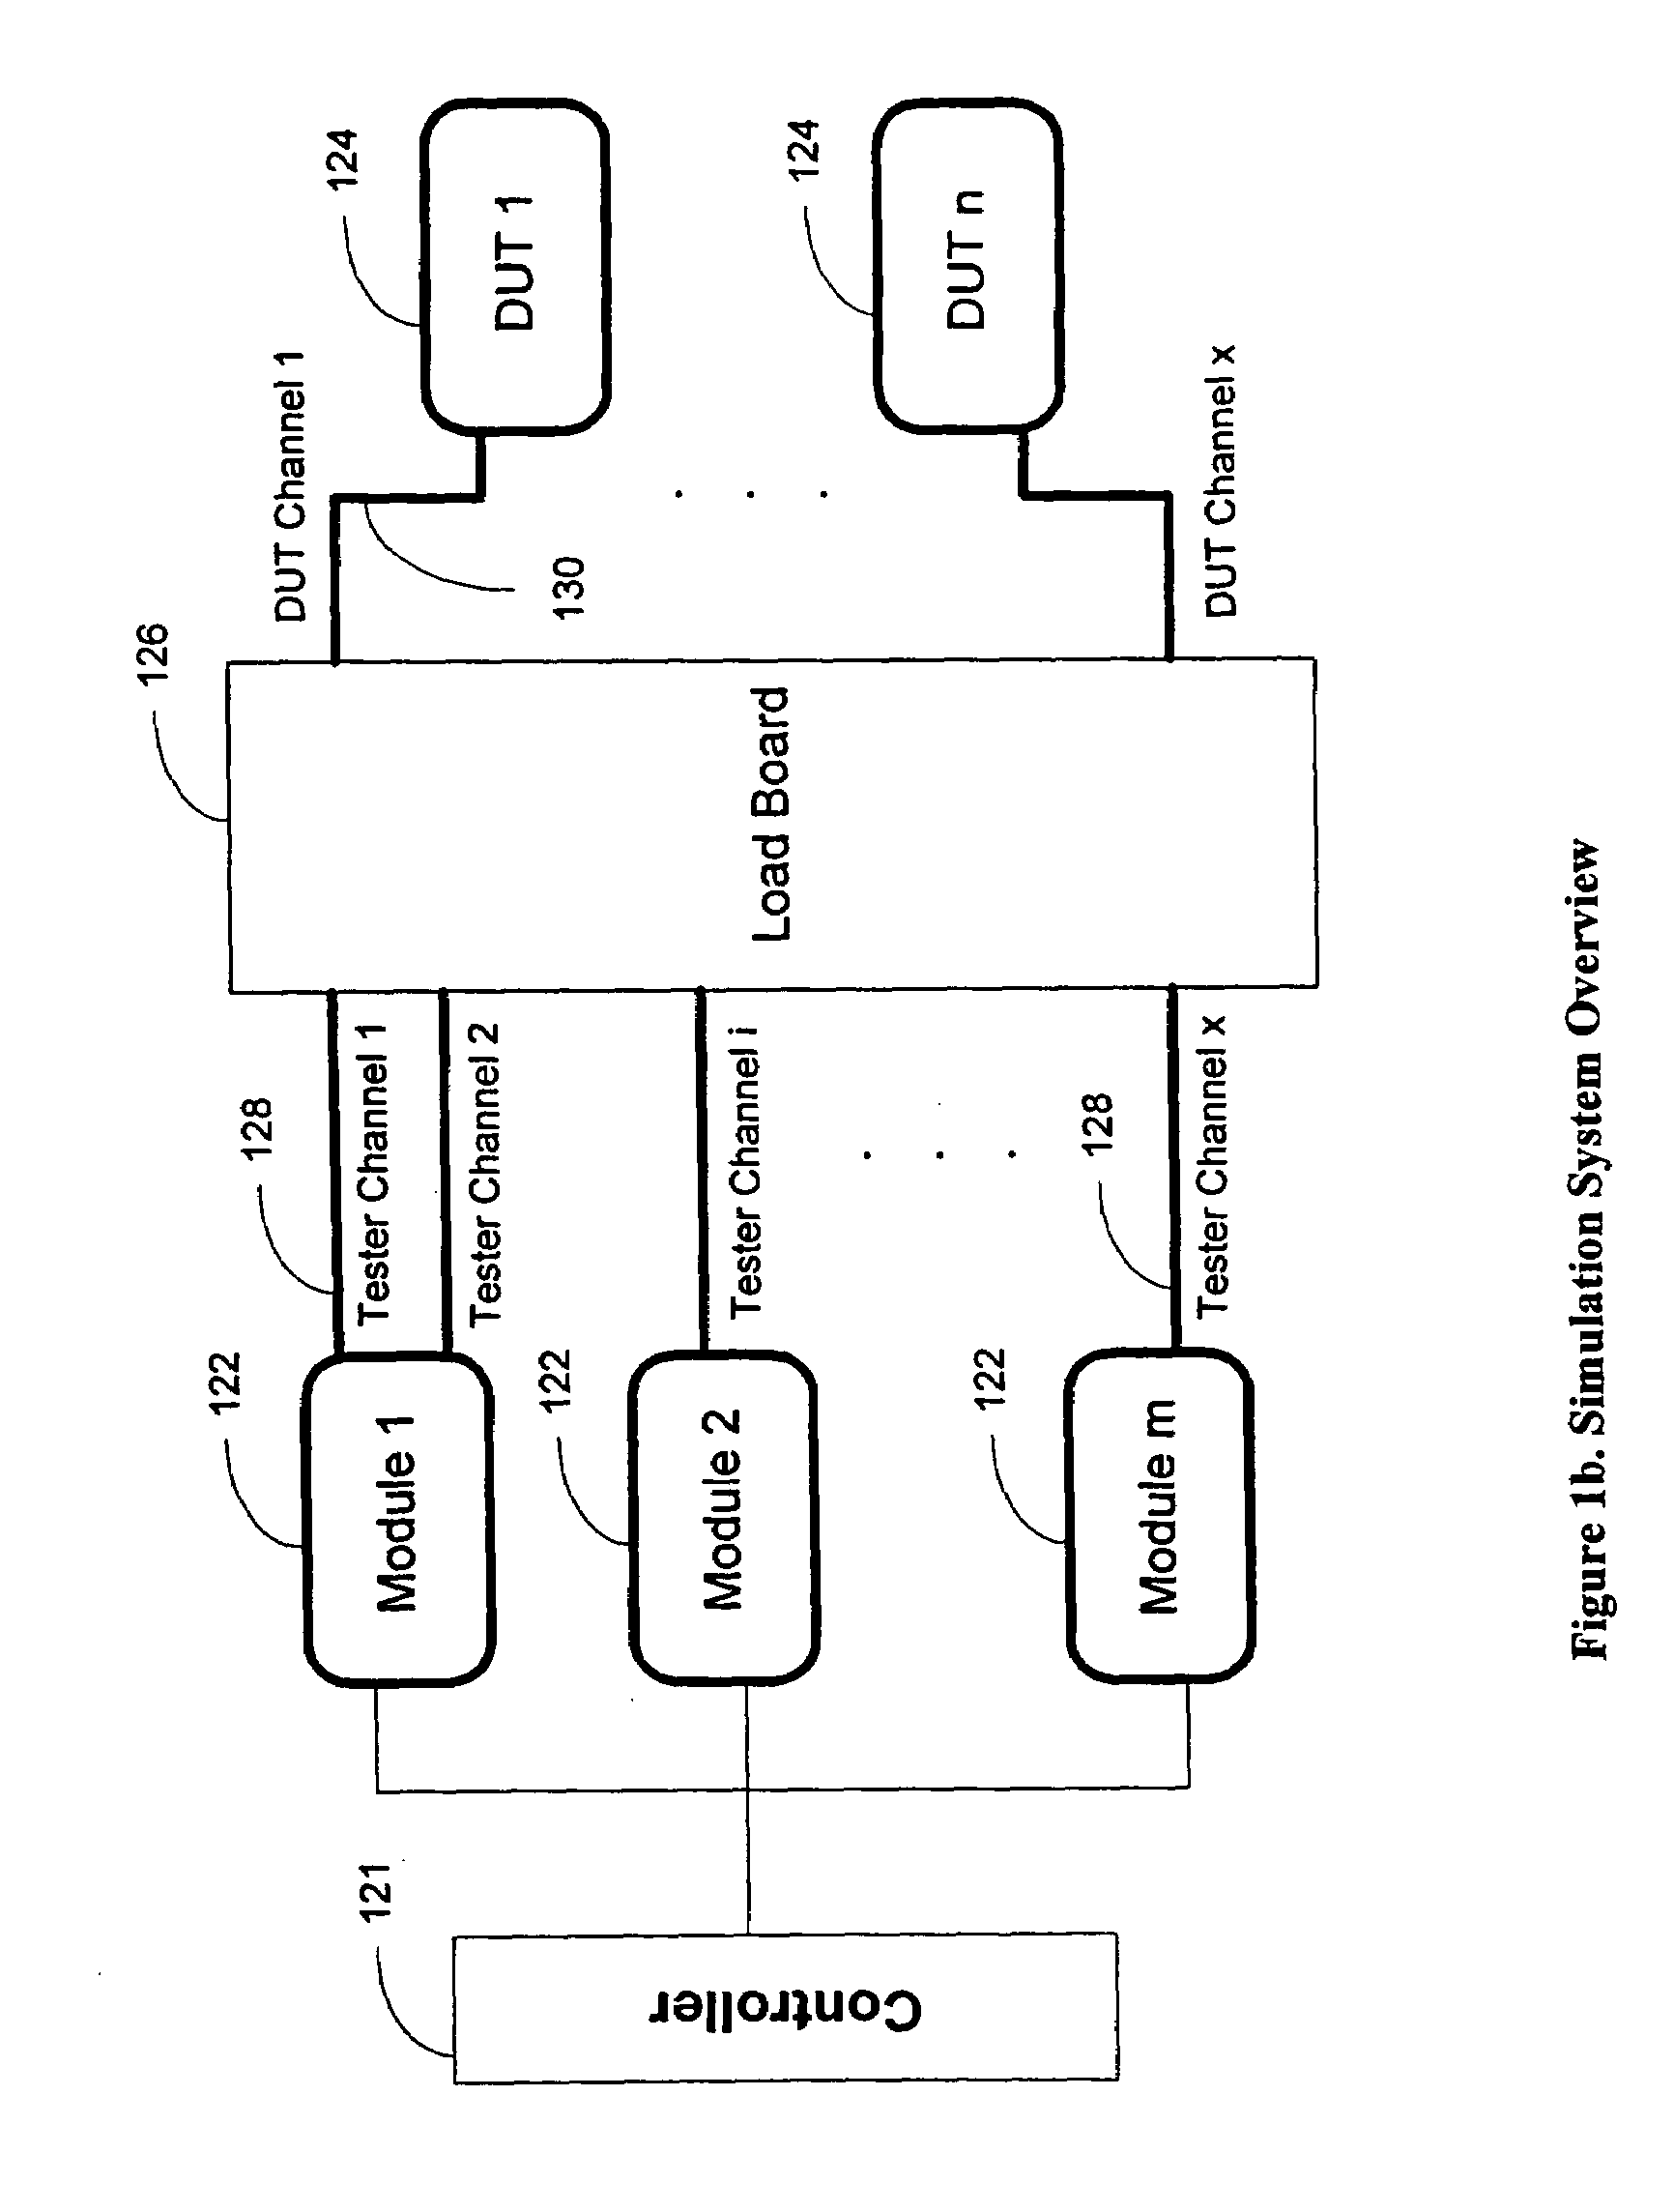 Method and system for simulating a modular test system